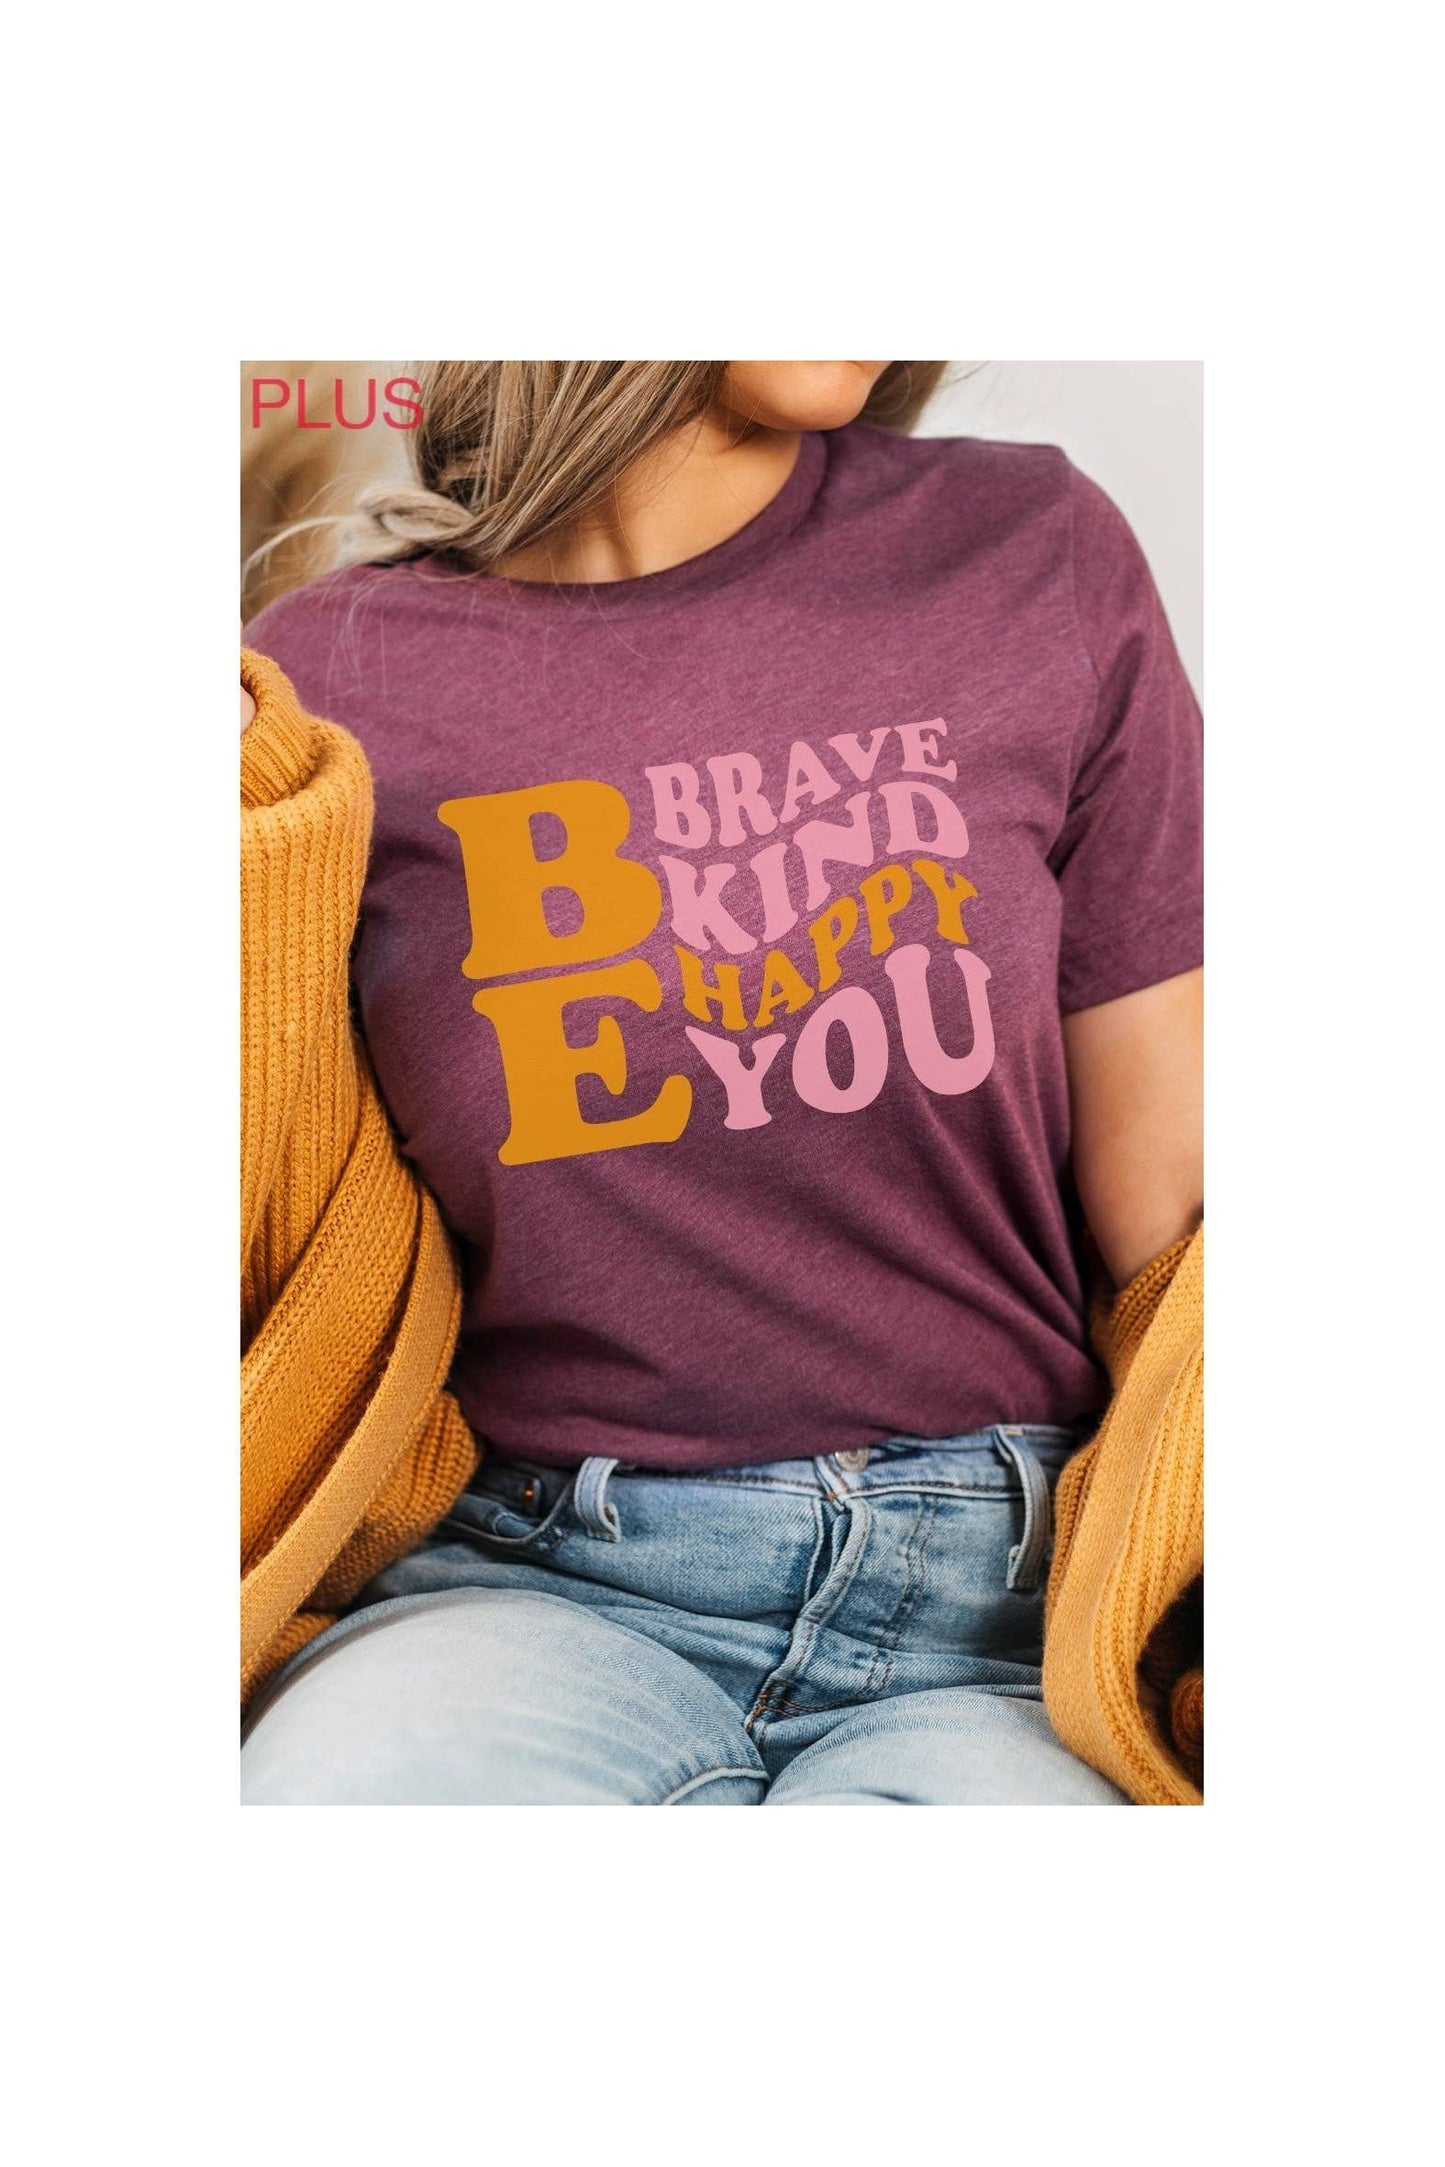 Be Brave Kind Happy Be You Graphic Tee-Graphic Tee-Kissed Apparel-Small-Revive Boutique